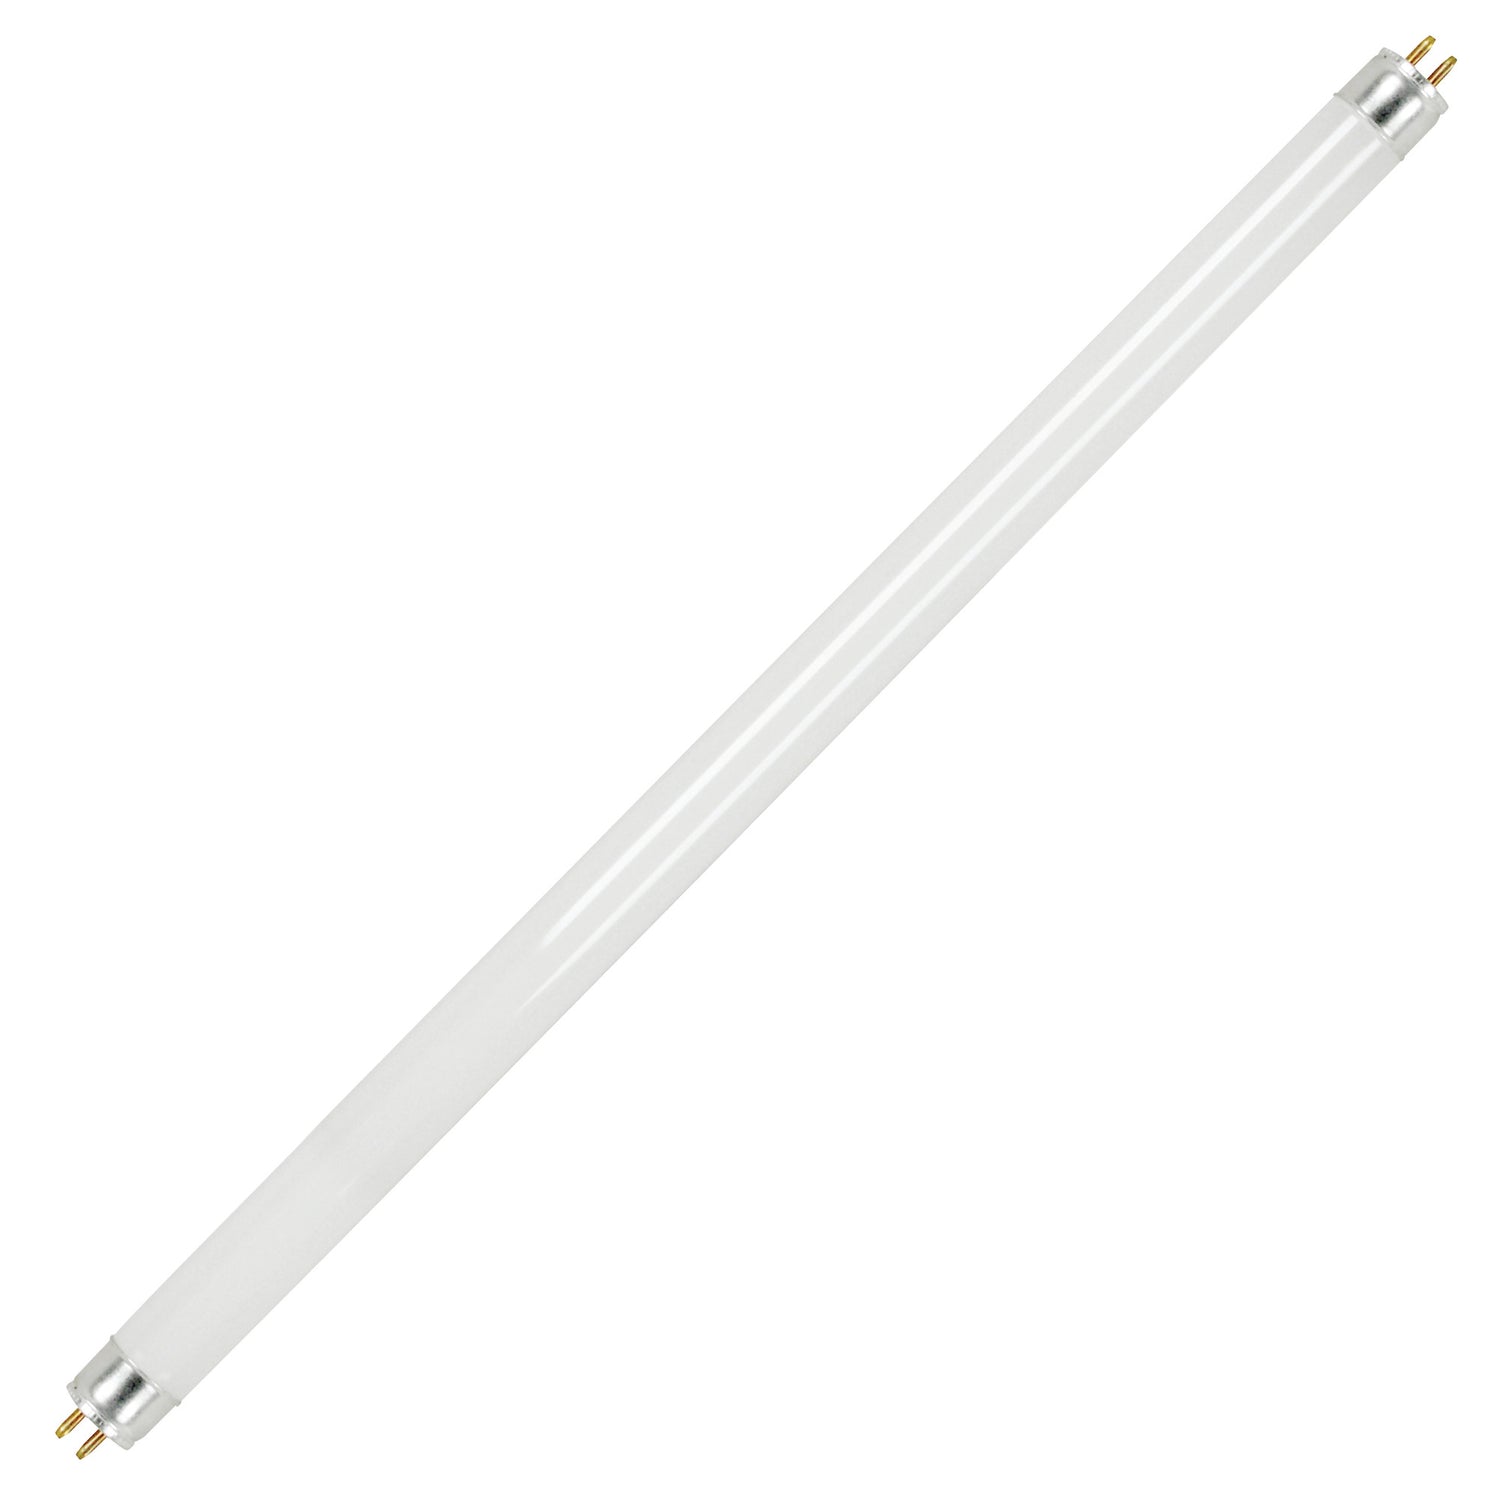 12 in. 8W Bright White (3000K) G5 Base (T5 Replacement) Fluorescent Linear Light Tube